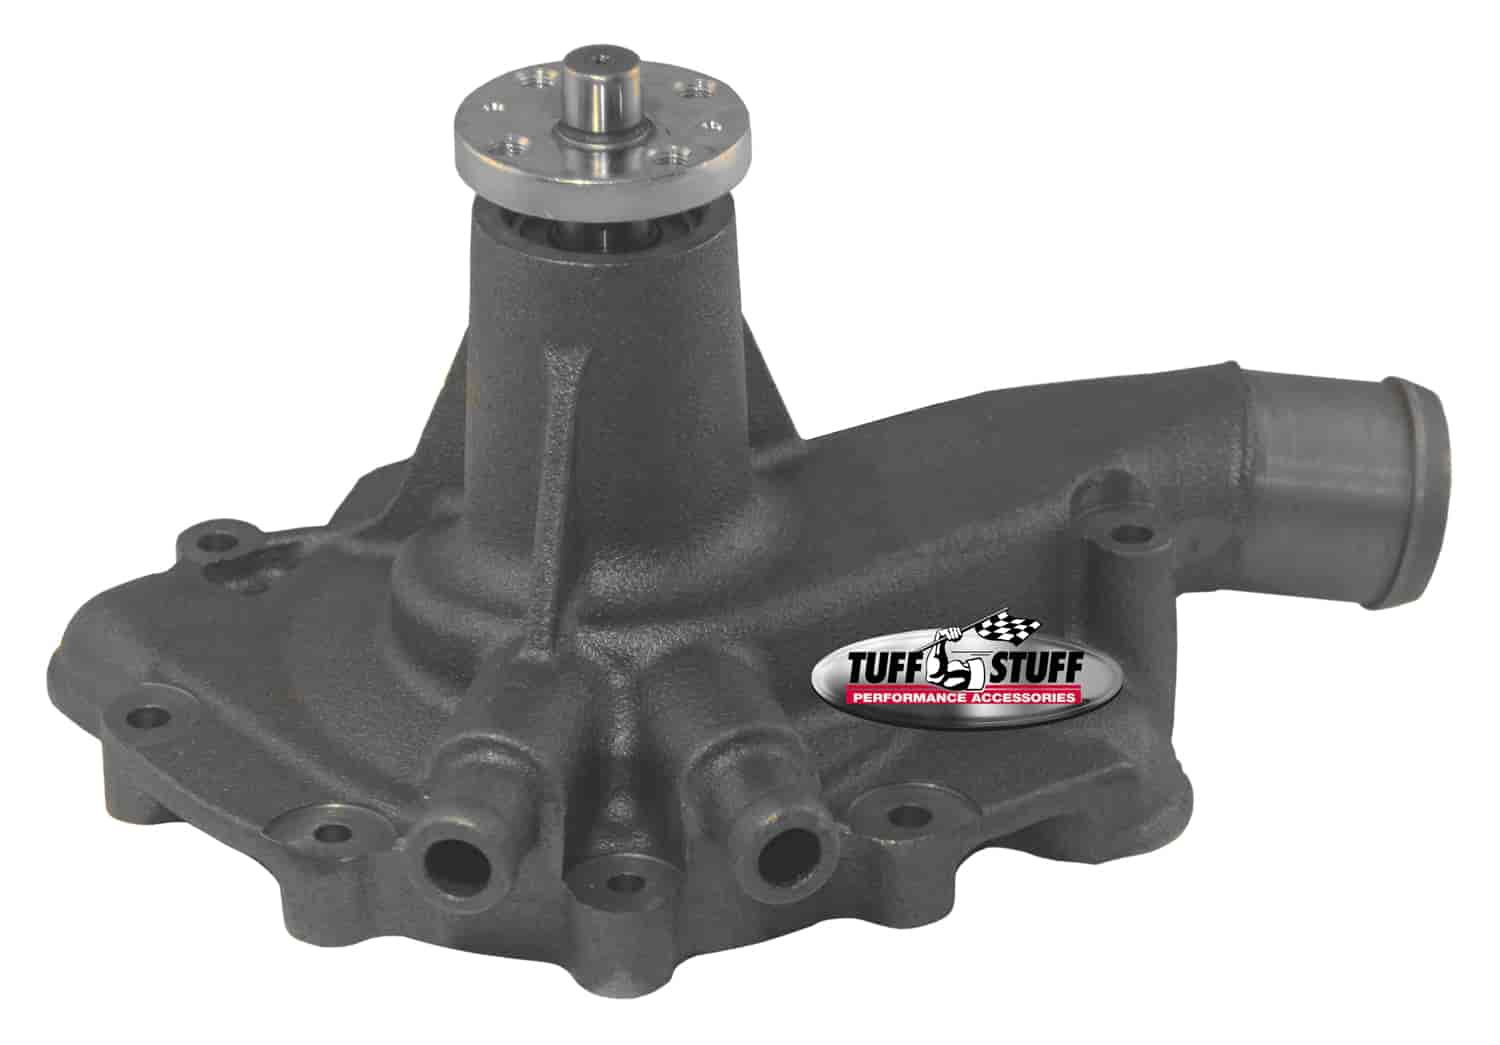 Standard Water Pump As Cast 1968-85 Oldsmobile/Buick Small